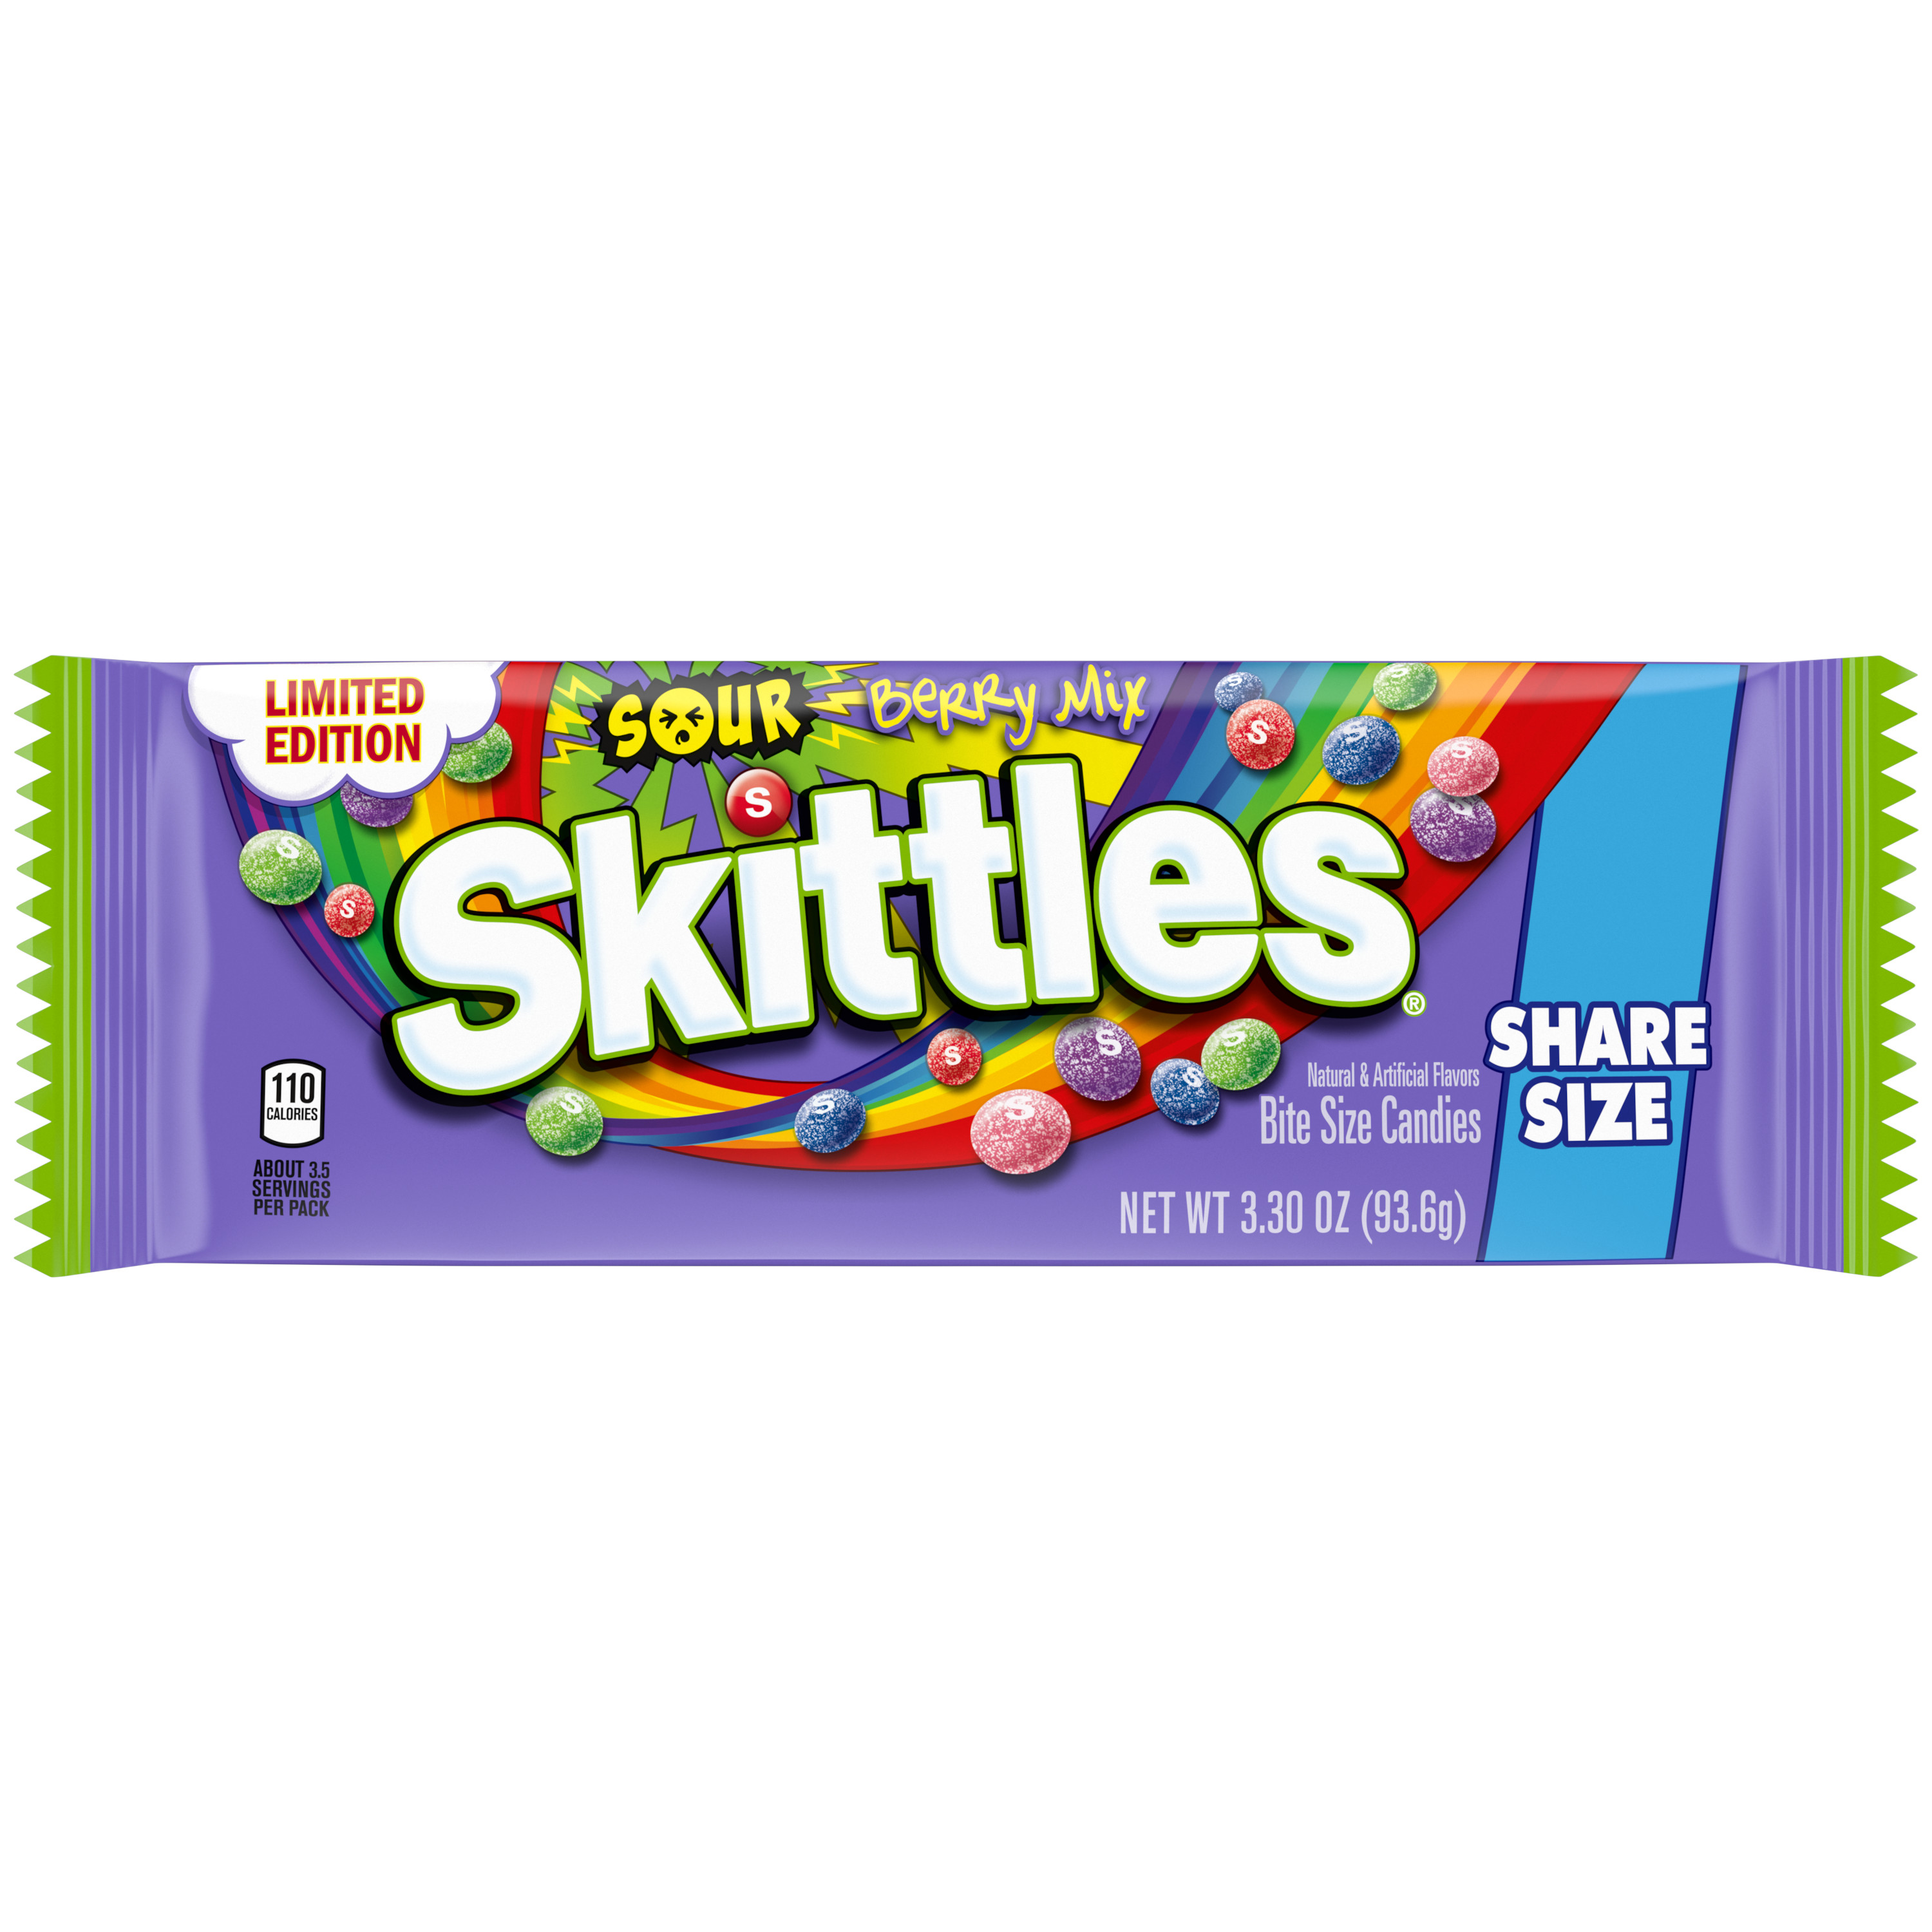 Skittles Sour Berry Limited Edition Chewy Candy, Sharing Size - 3.3 oz Bag - image 1 of 13